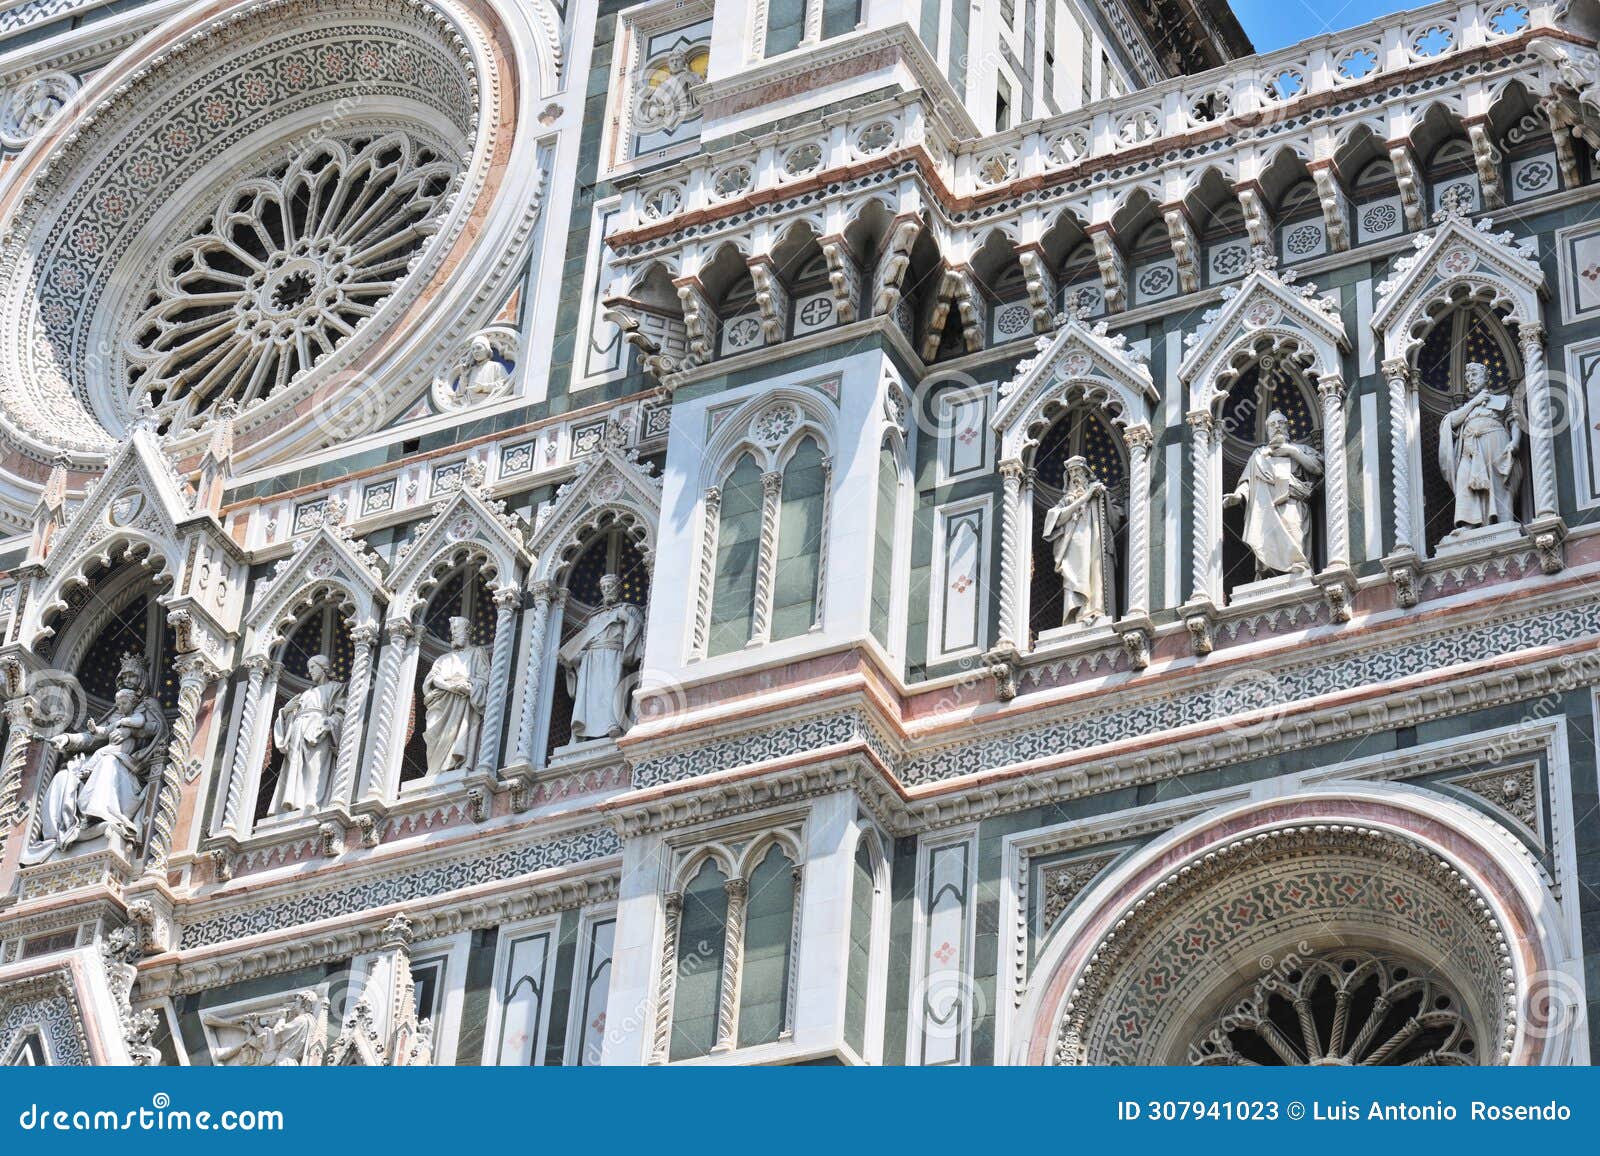 the basilica of the holy cross is an outstanding italian gothic basilica built in the city of florence